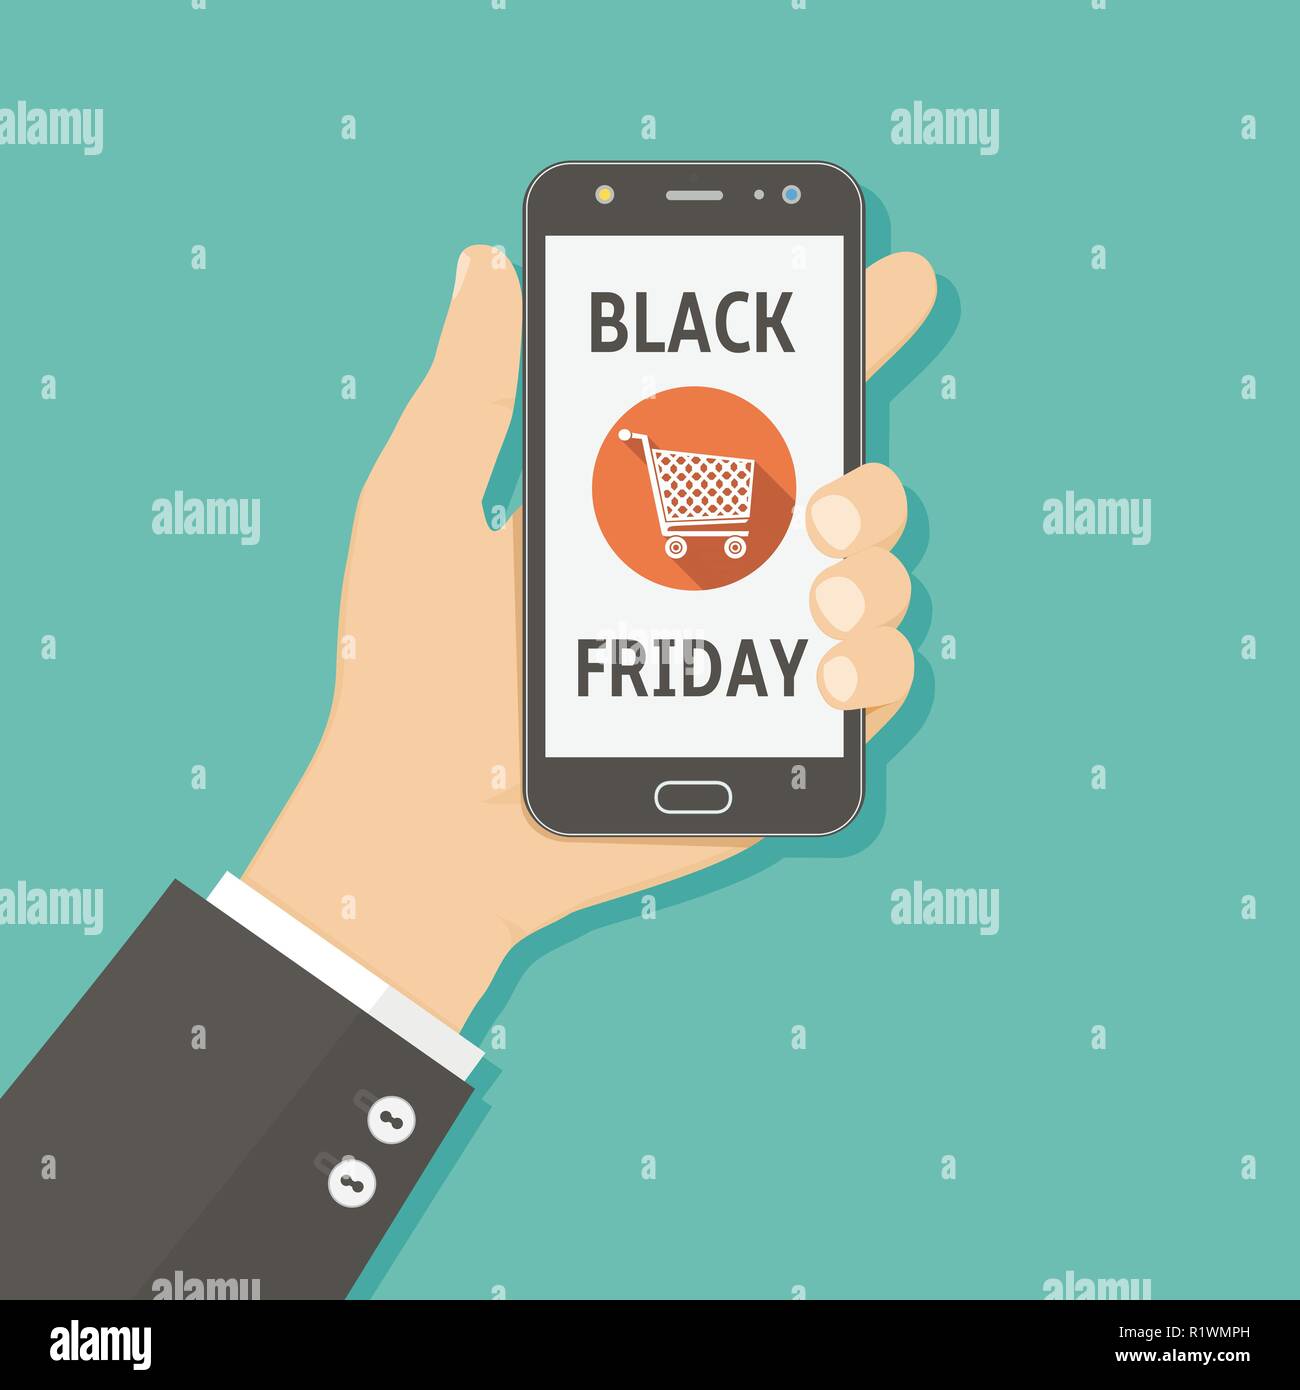 Black friday sale. Hand holding smartphone with Black friday sale on screen. Stock Vector